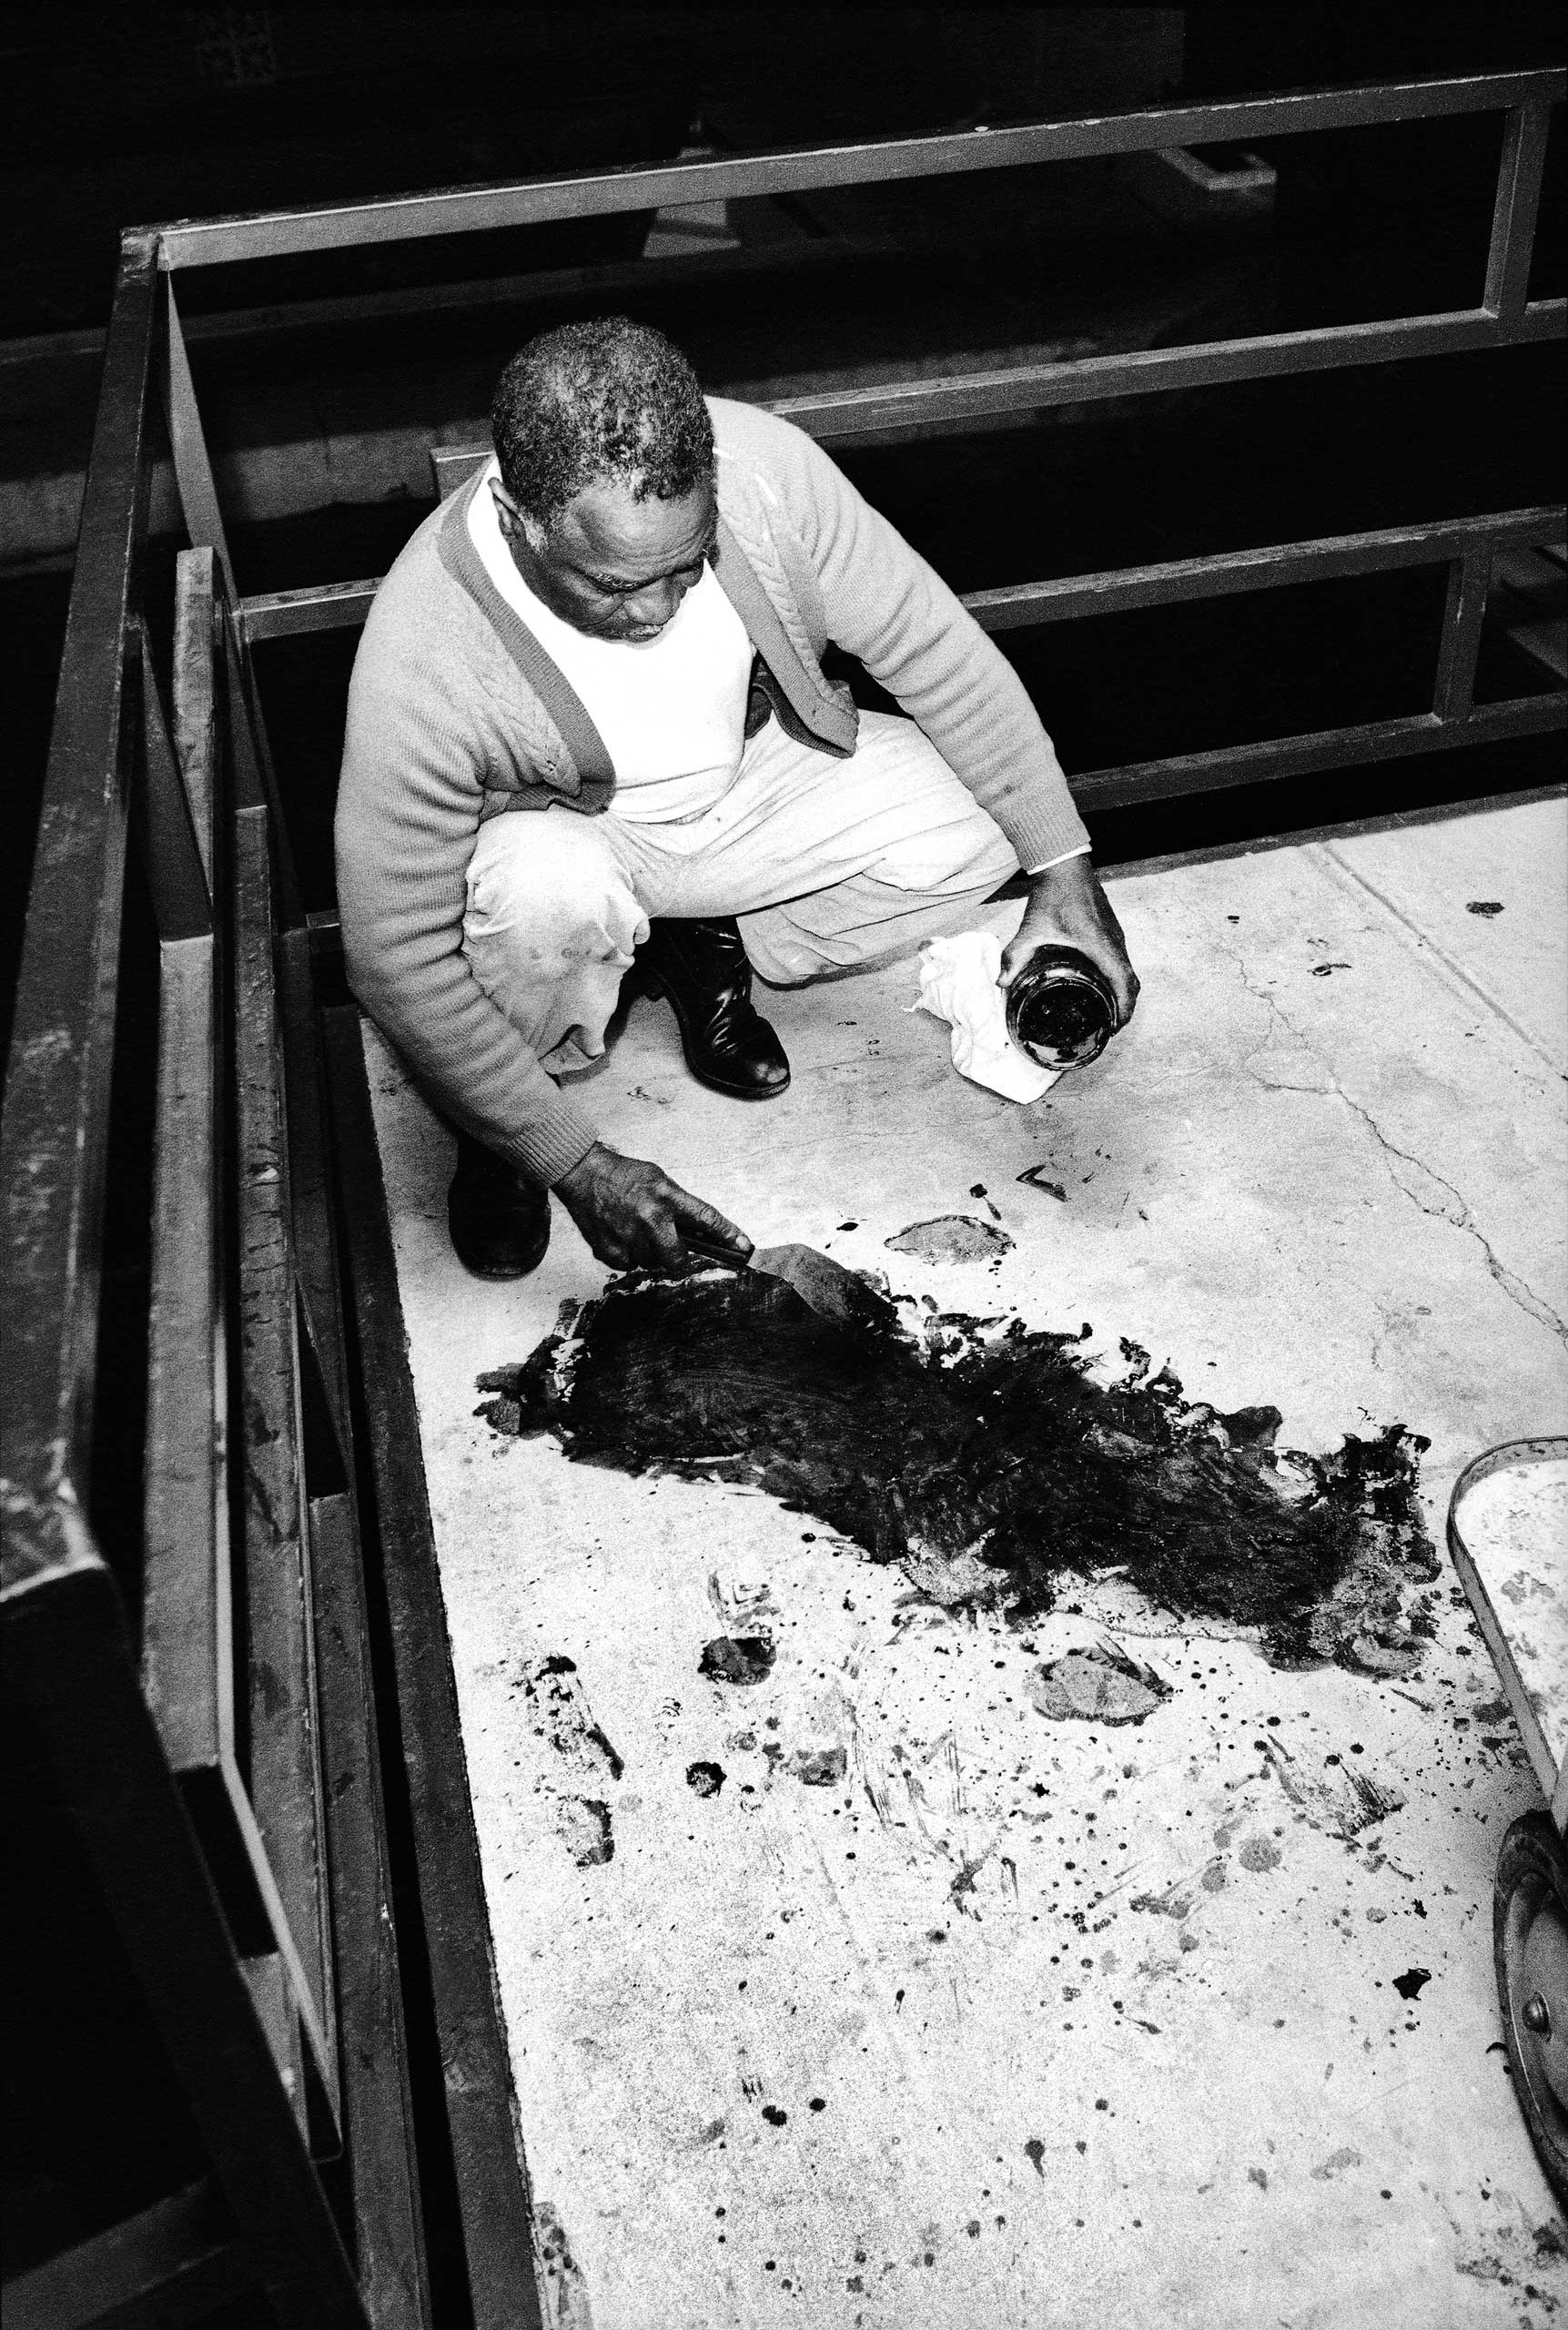 Theatrice Bailey attempts to clean blood from the balcony, hours after the 6 PM shooting of Dr. King. "I don't know if there were official people around taking notes and pictures and things like that," Groskinsky told LIFE.com. "Nobody was there when we w